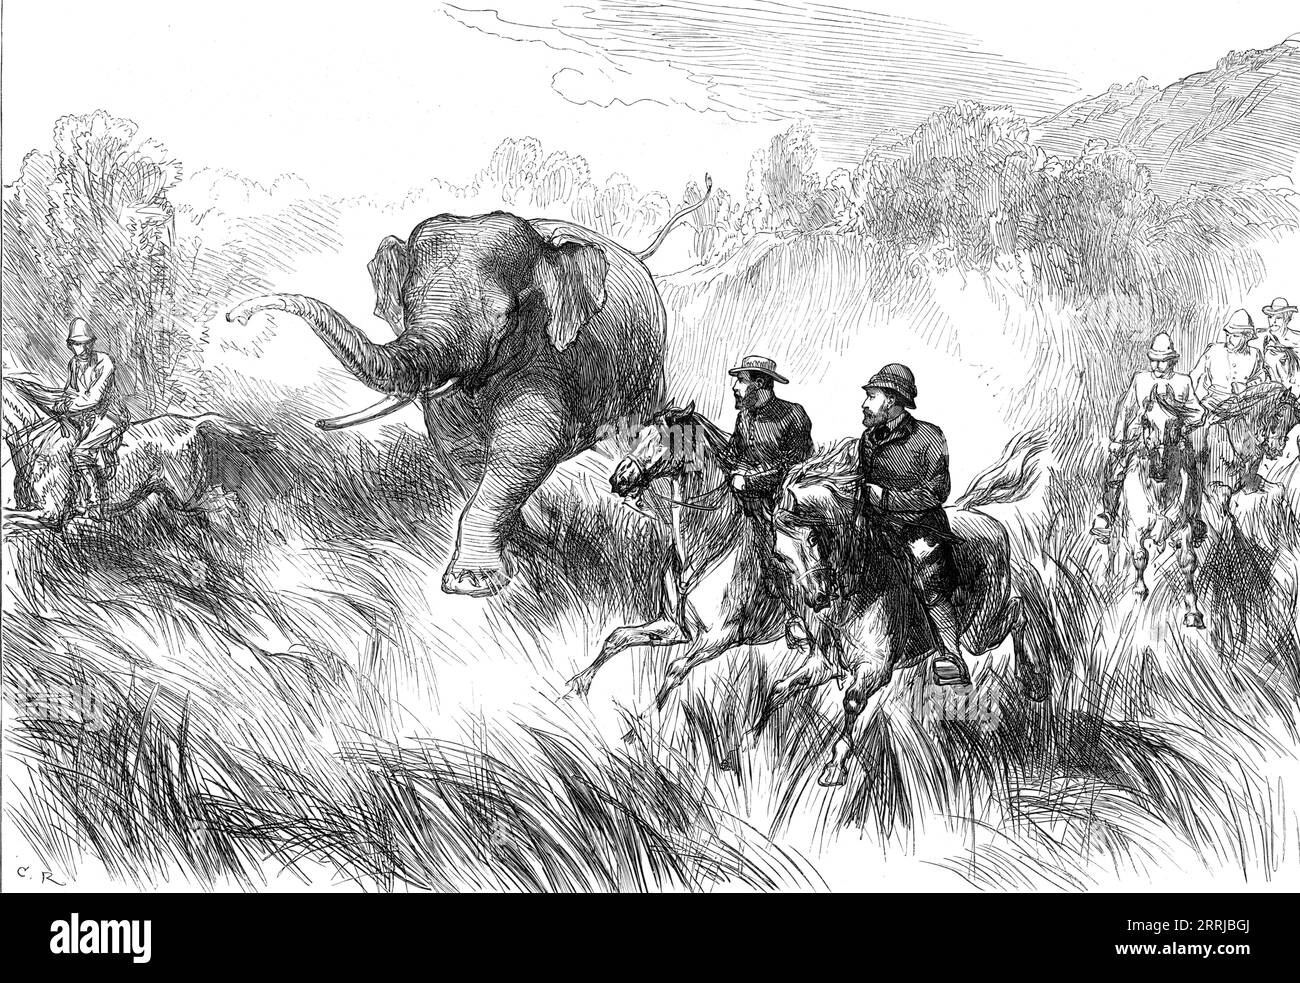 The Prince of Wales in the Terai: Mr. Rose chased by a Wild Elephant, from a sketch by one of our special artists, 1876. The future King Edward VII in India. 'This elephant chanced to be one which had broken its left tusk, a stump only remaining; but Mr. Rose [one of the Prince's suite] had a narrow escape, being for a moment almost within reach of the elephant's trunk'. From &quot;Illustrated London News&quot;, 1876. Stock Photo